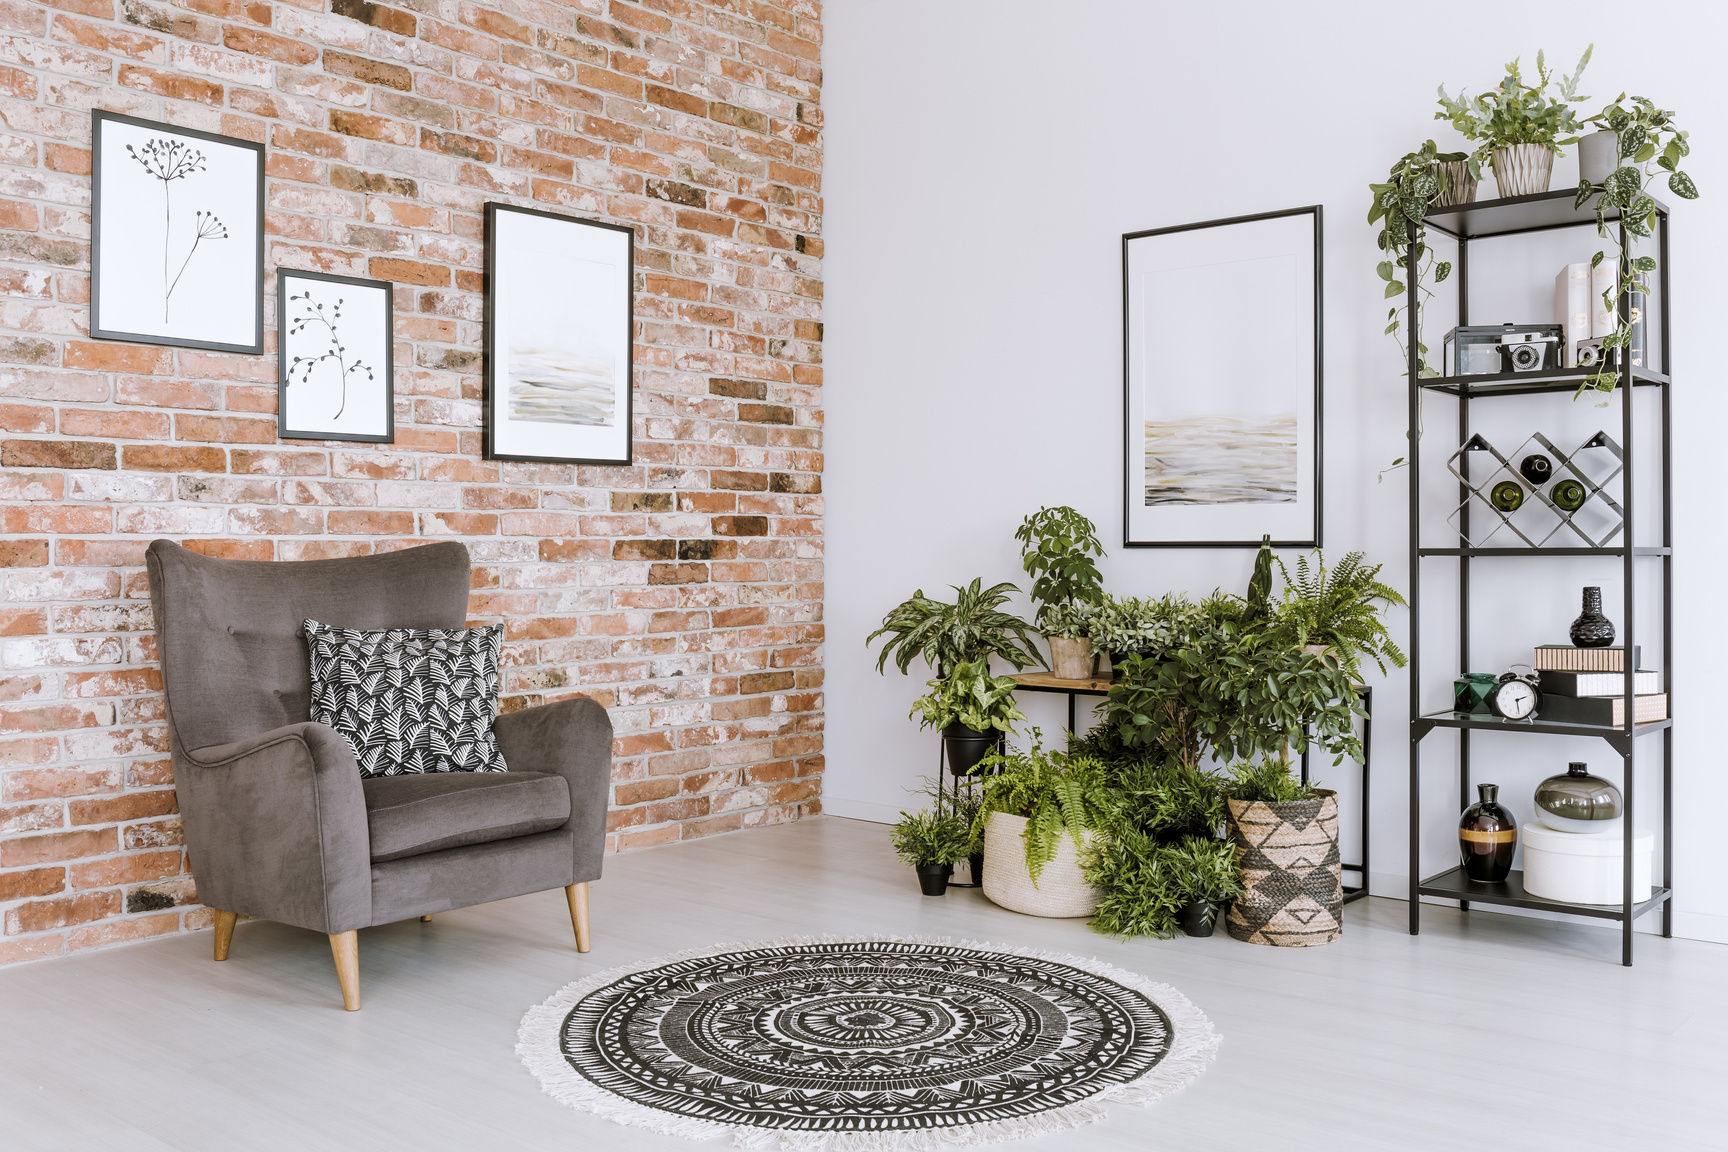 Living room interior with plants